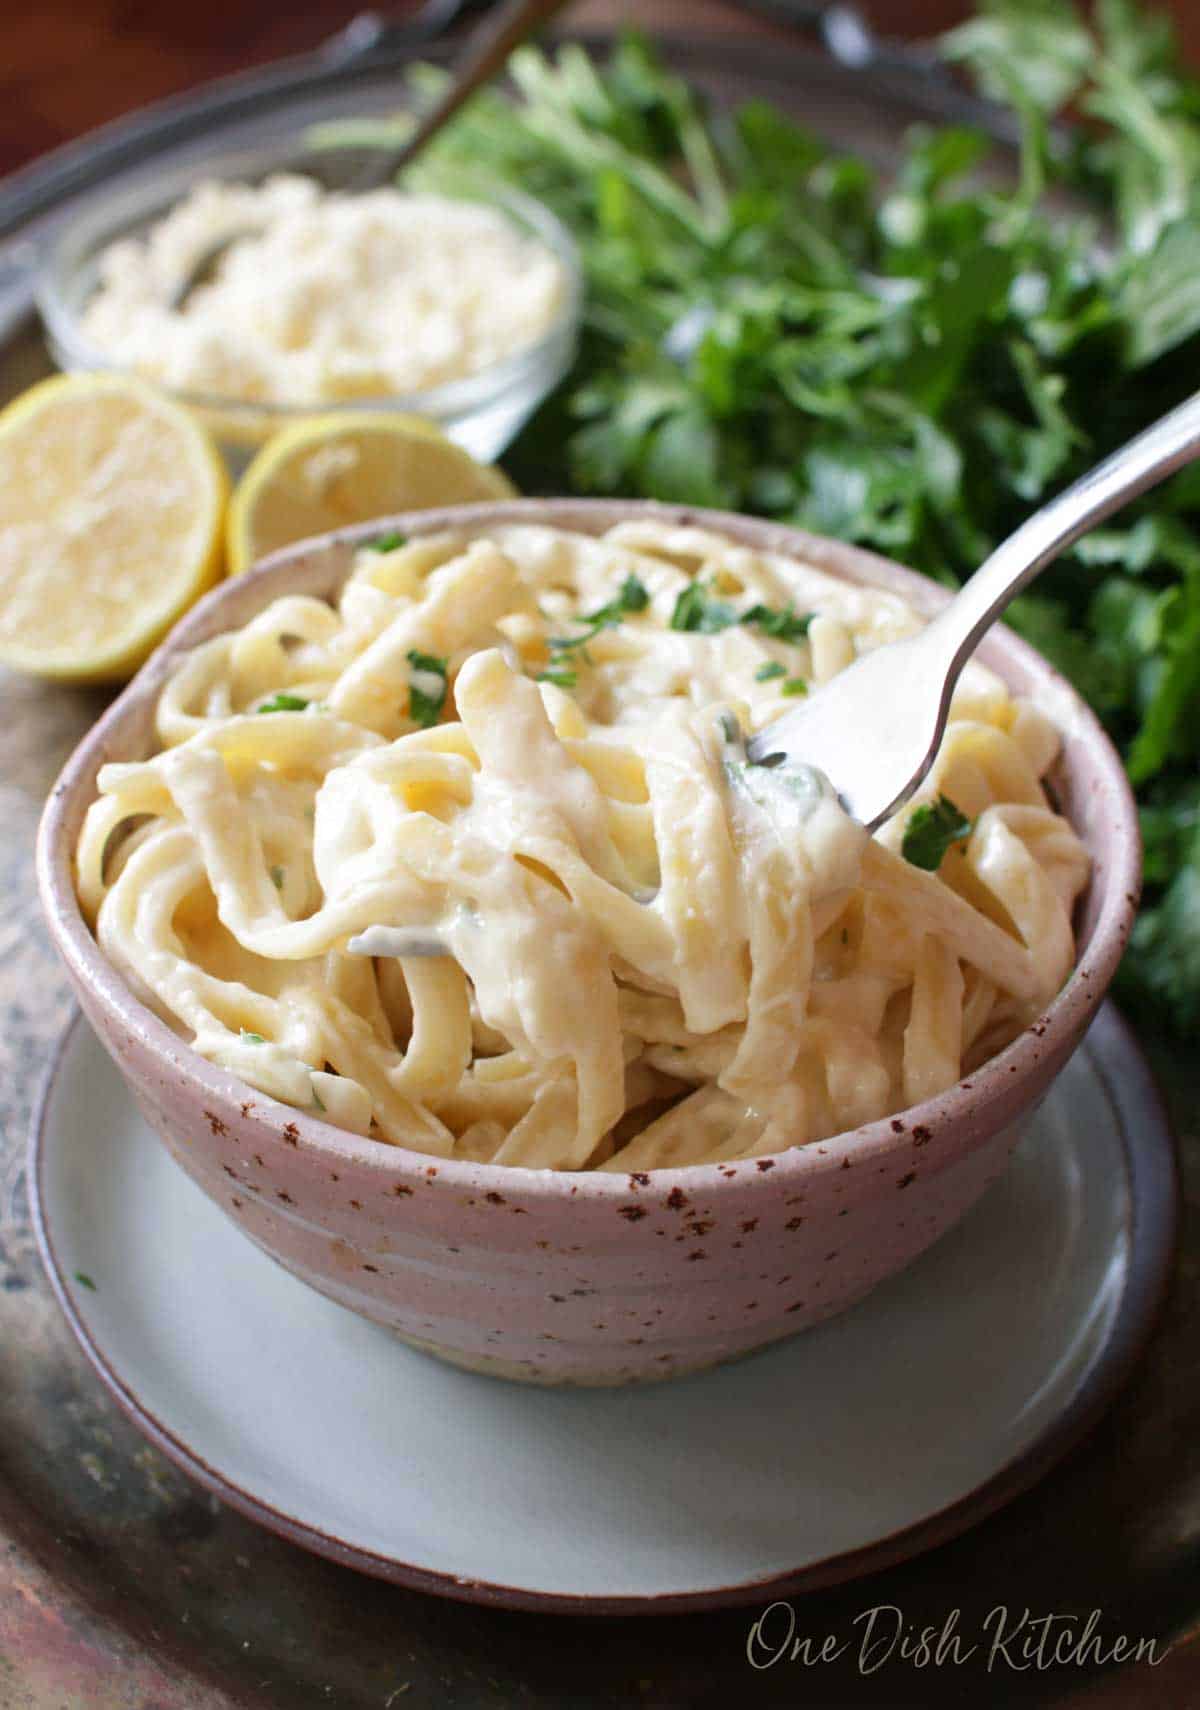 A forkful of fettuccine alfredo from the bowl next to a dish of grated parmesan cheese and lemon halves all on a metal tray